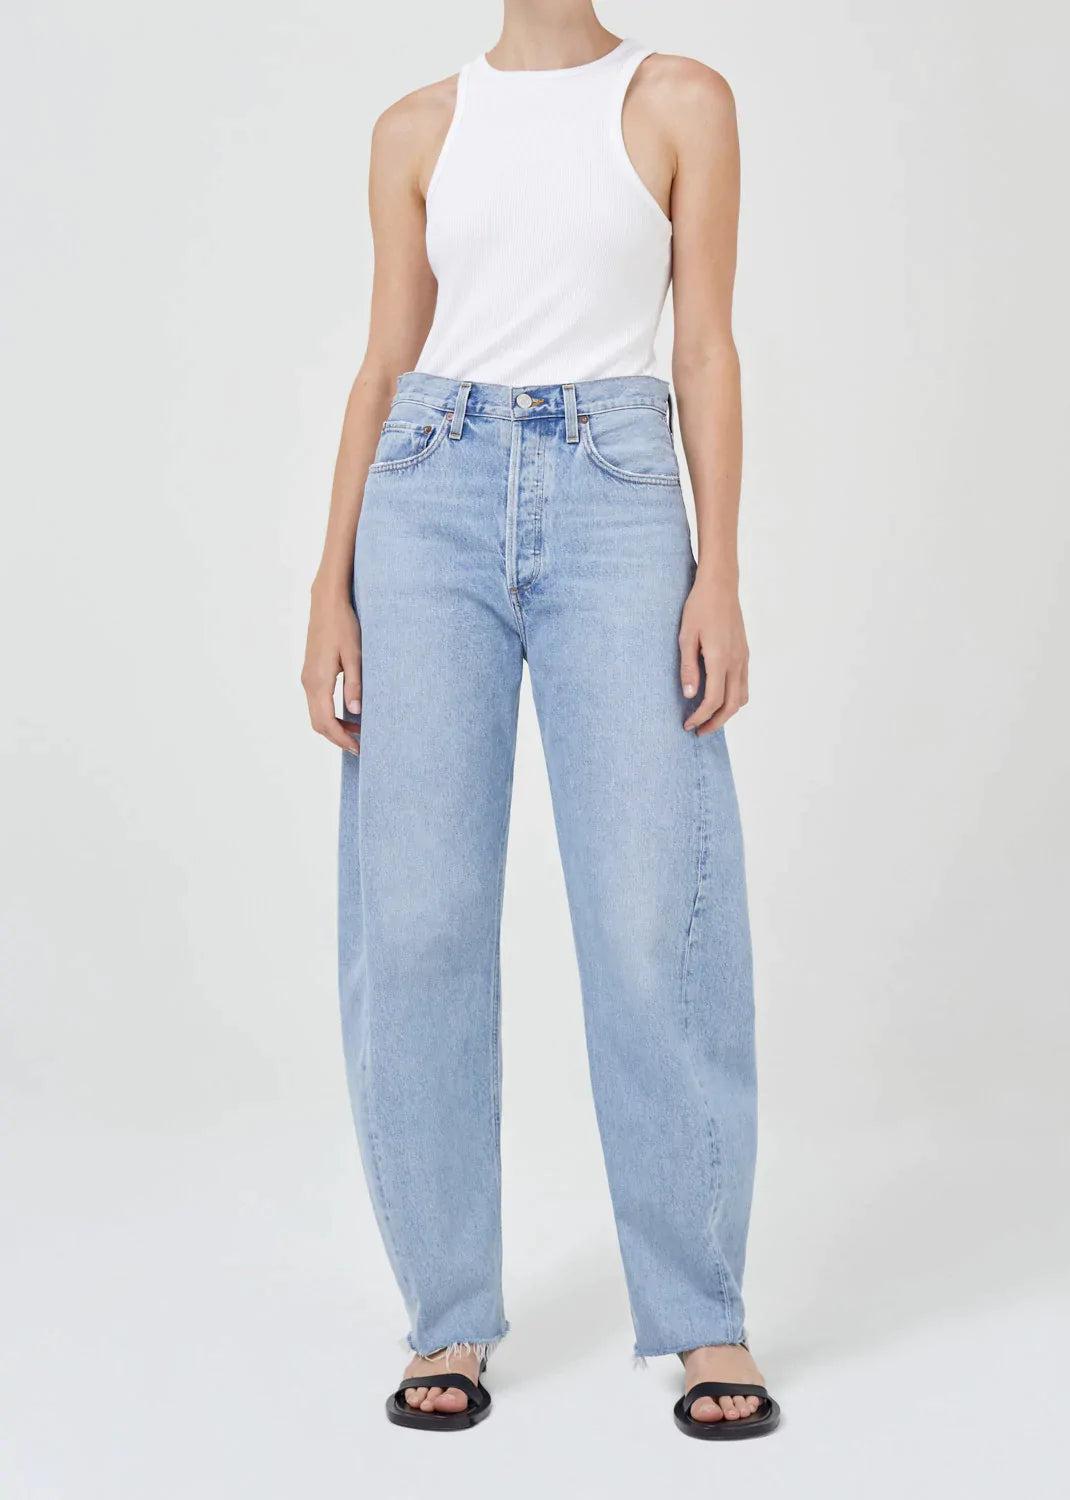 Agolde Cotton Low Rise Baggy Jean in Blue | Lyst